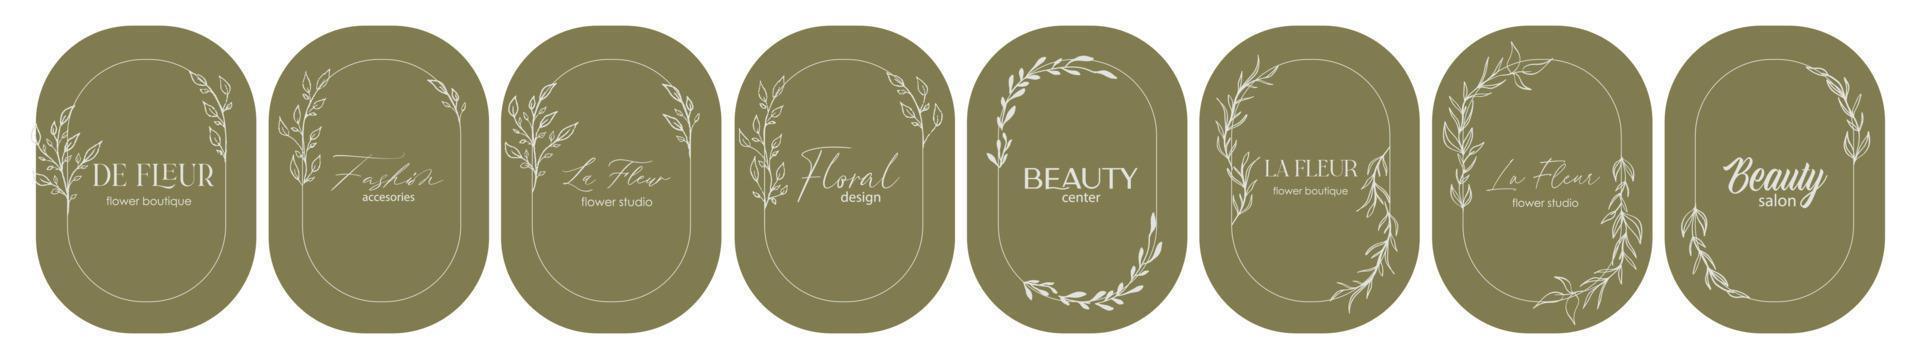 Logo design template and monogram concept in trendy linear style with arch, floral frame,emblem for fashion, beauty and jewellery, Wedding invitation, socia. La Fleur - flower in French. vector